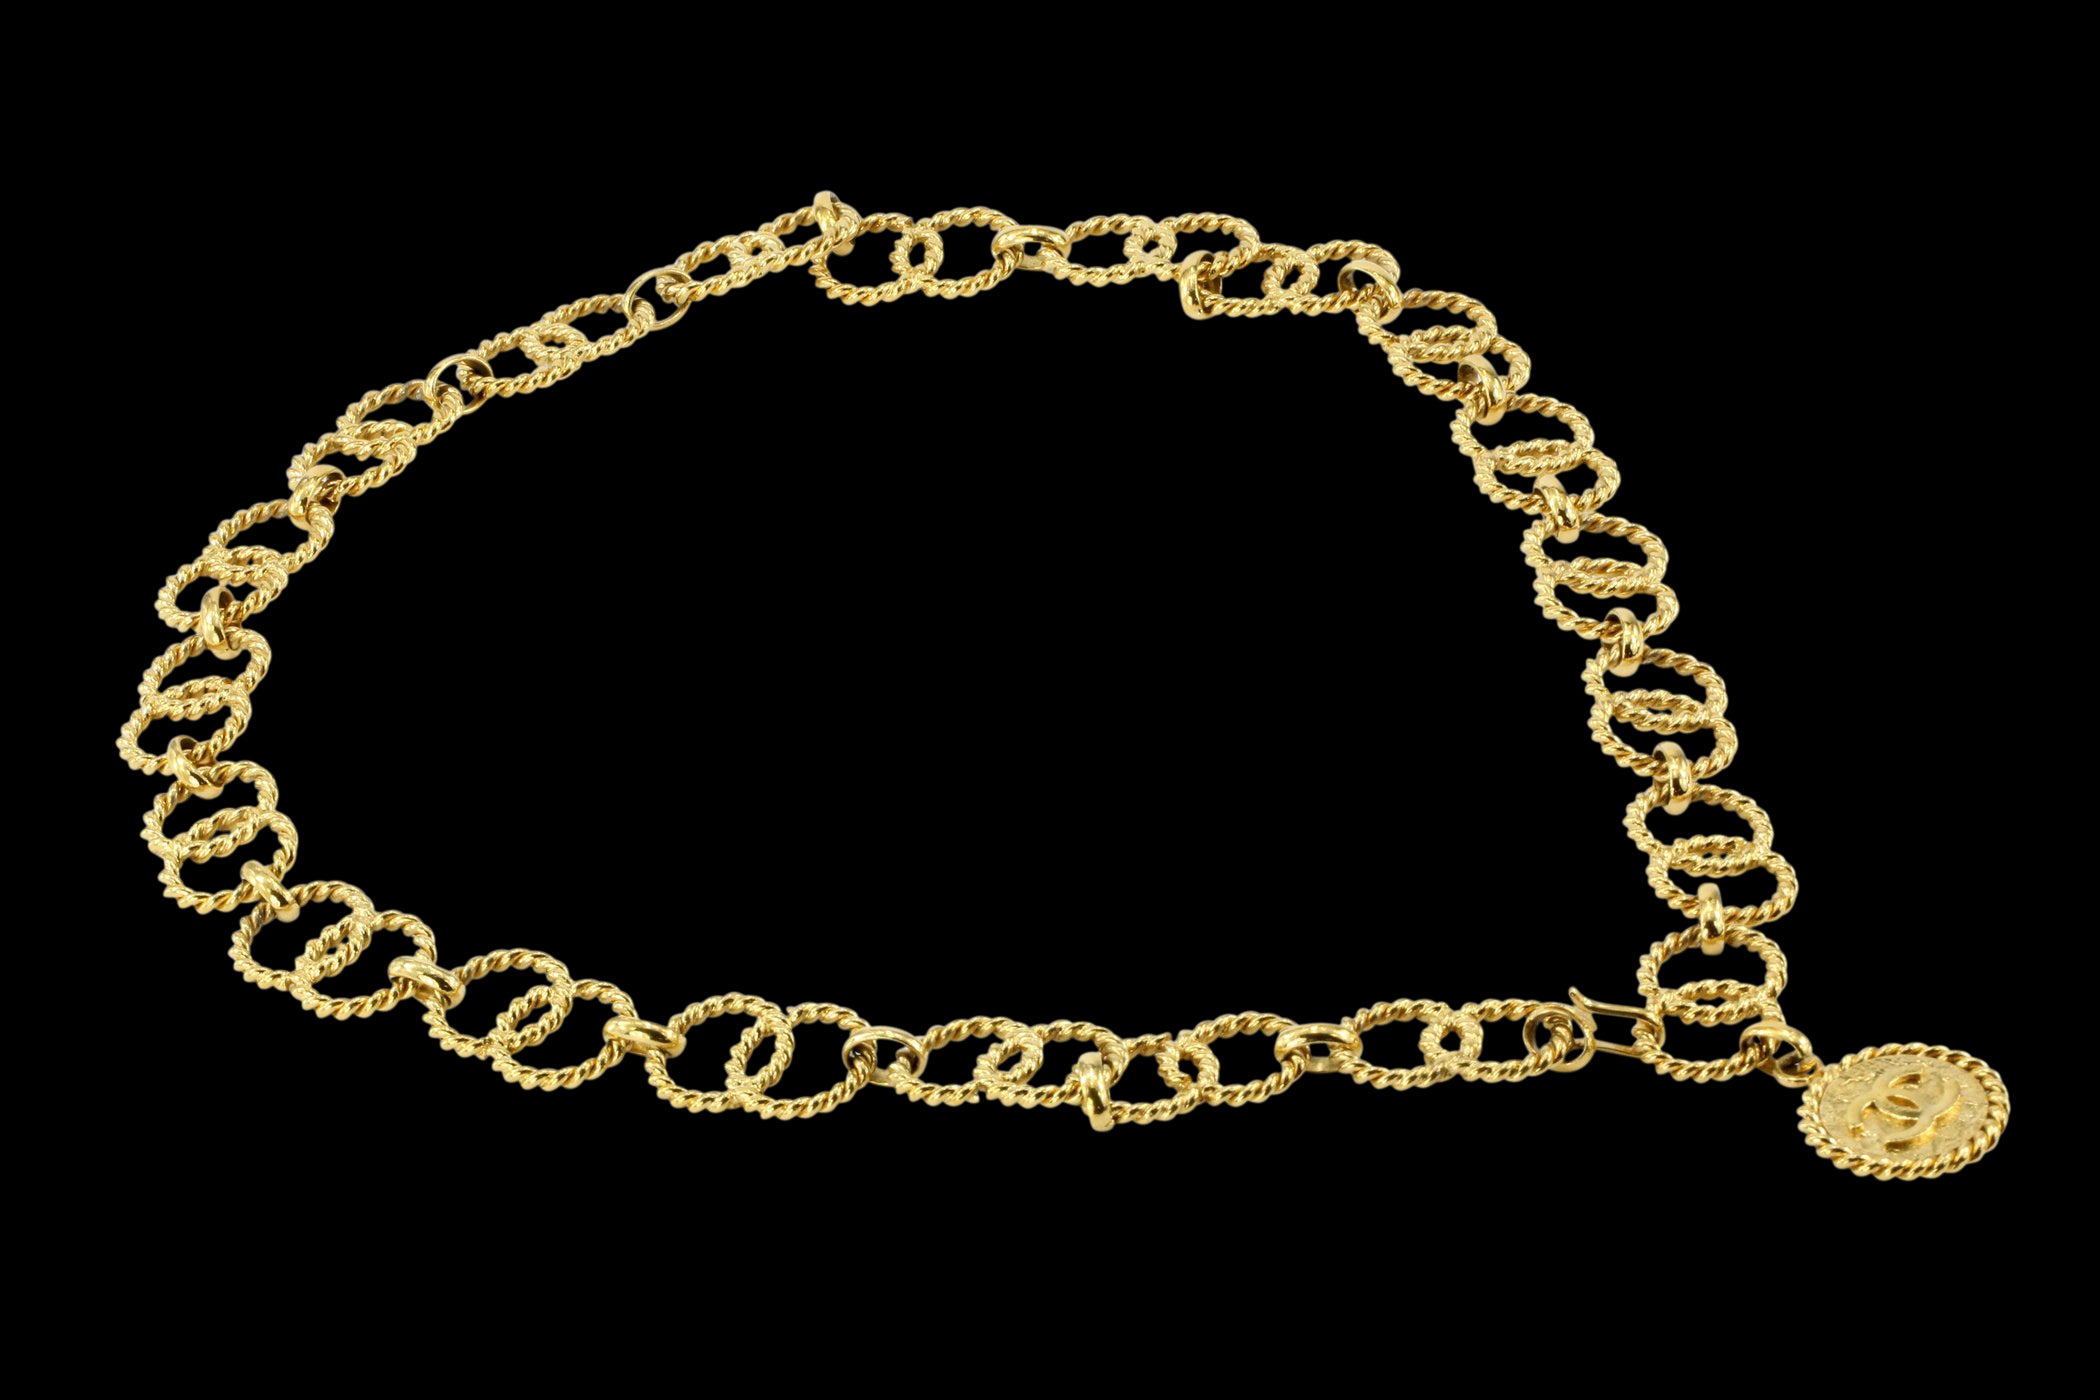 Channel Gold Metal Ring Chain Necklace or Belt with CC Medallion – QUEEN MAY